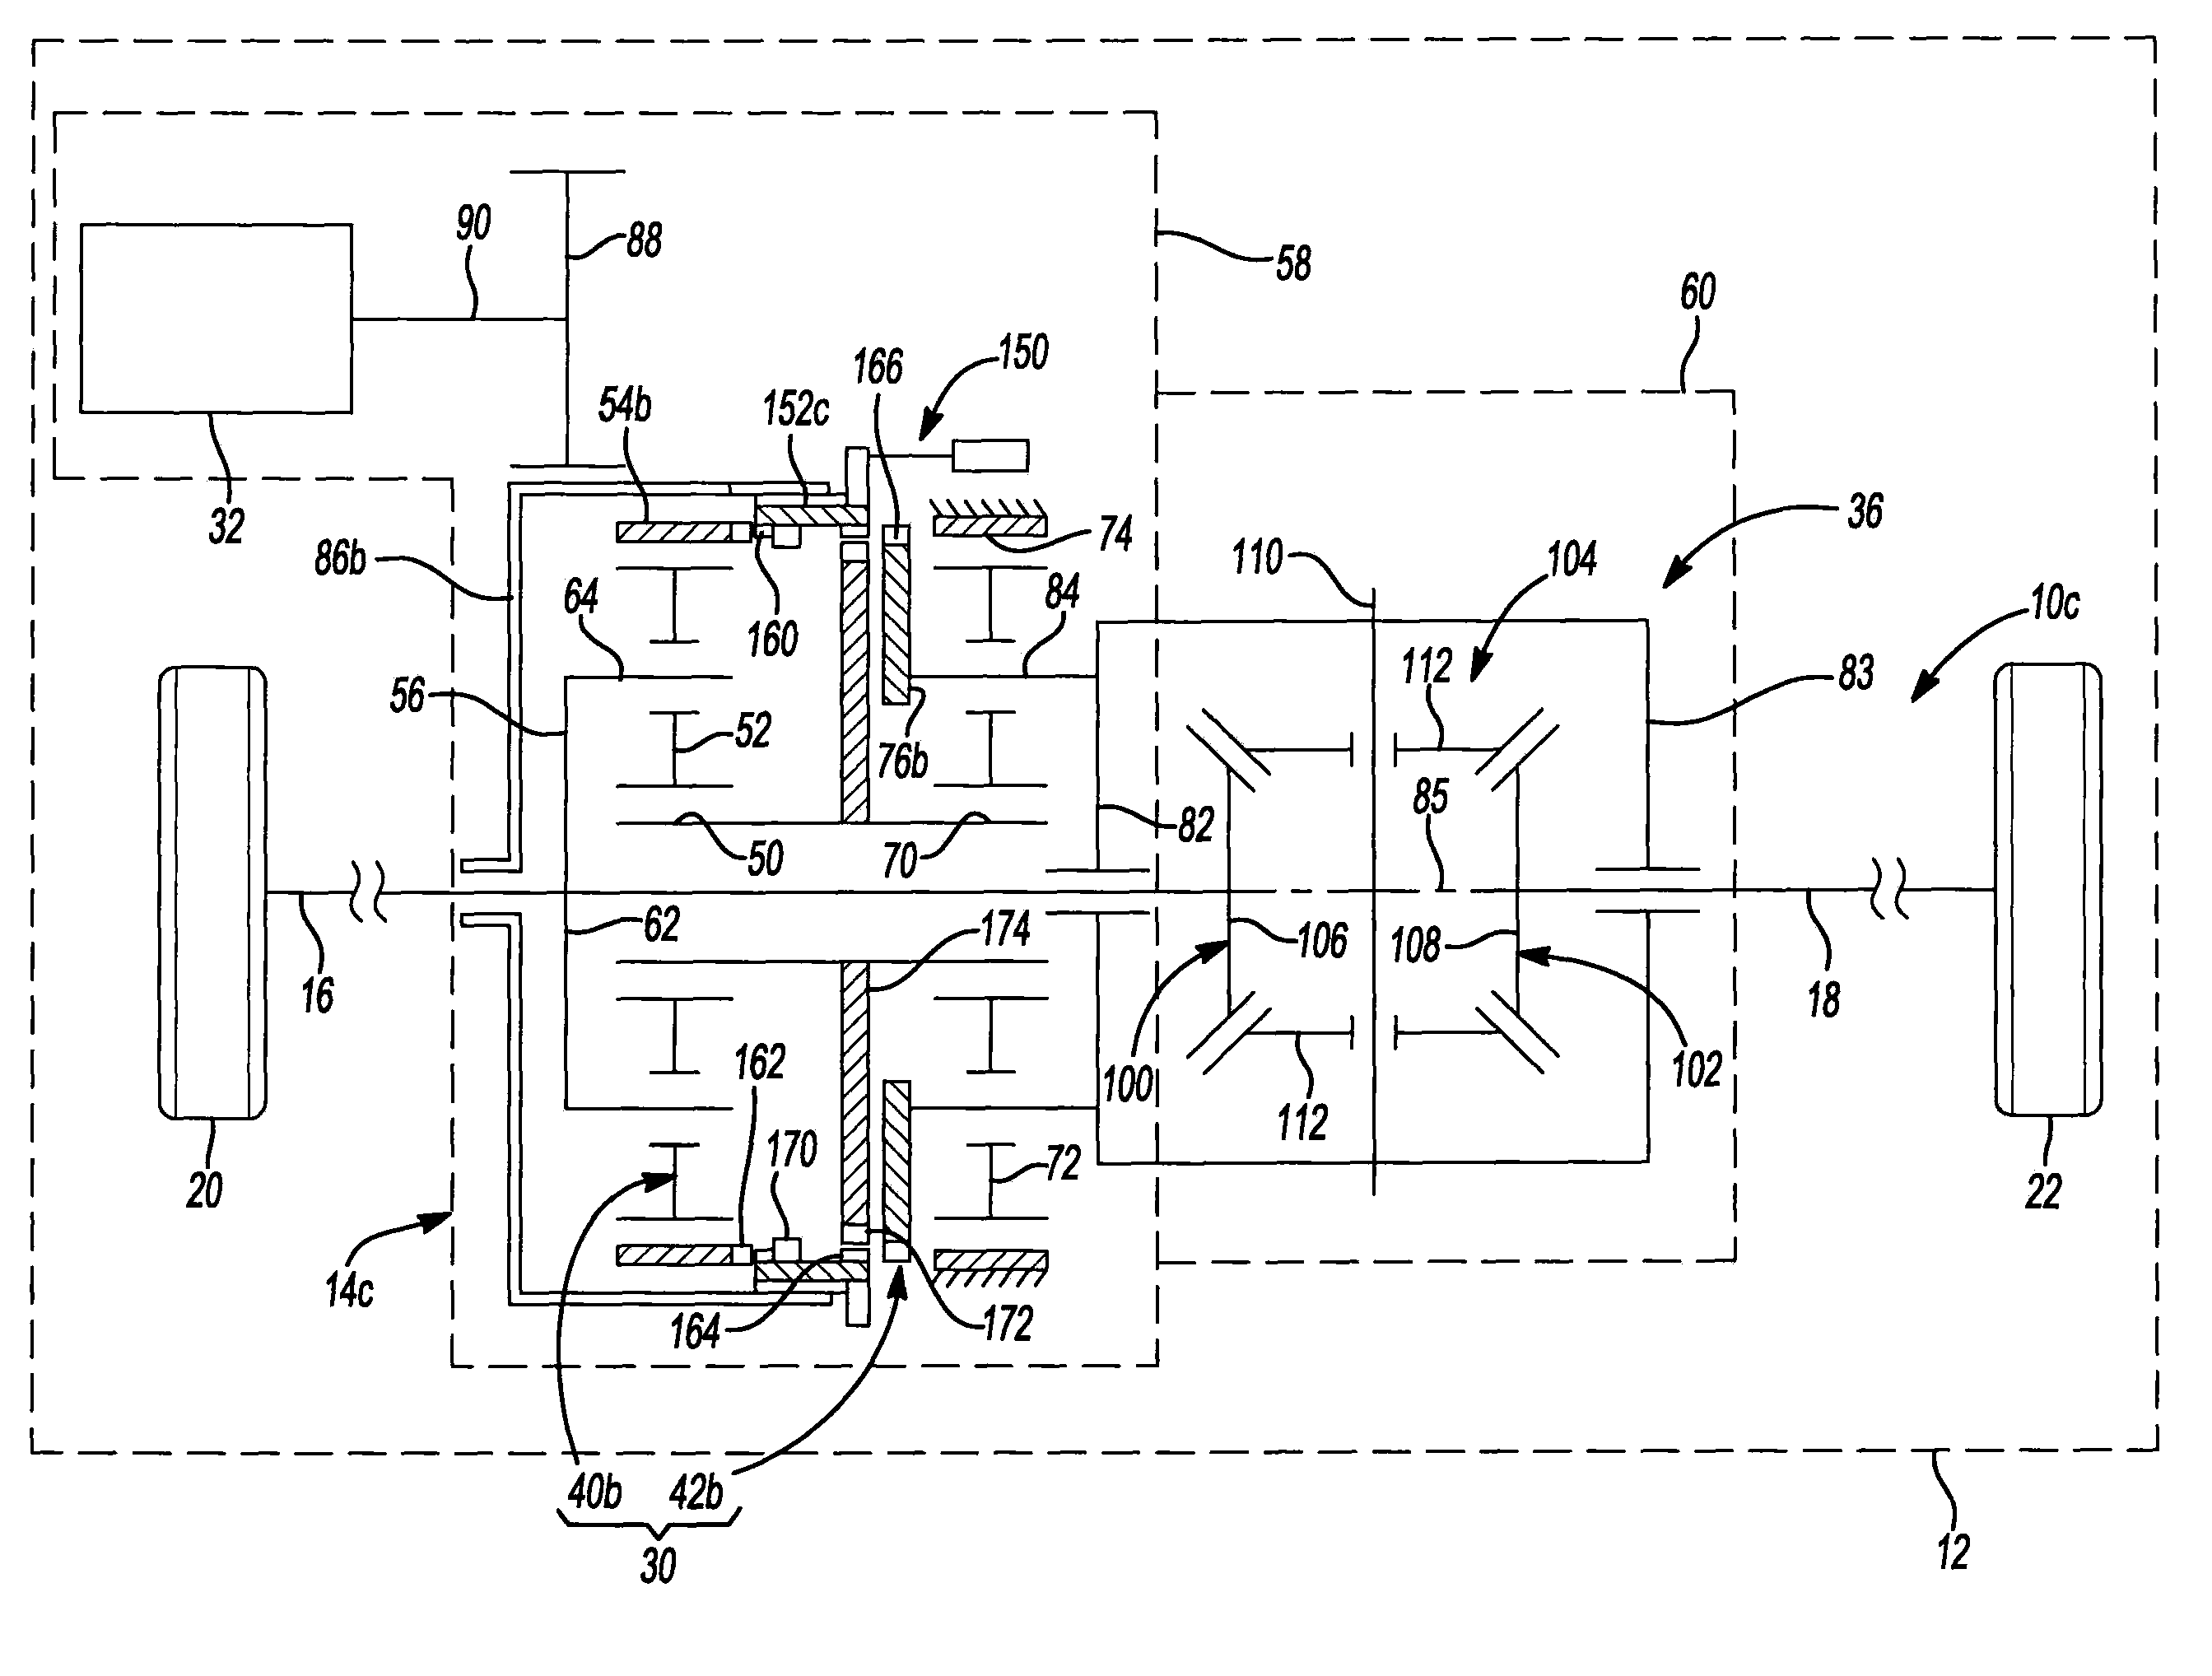 Axle assembly with torque distribution drive mechanism